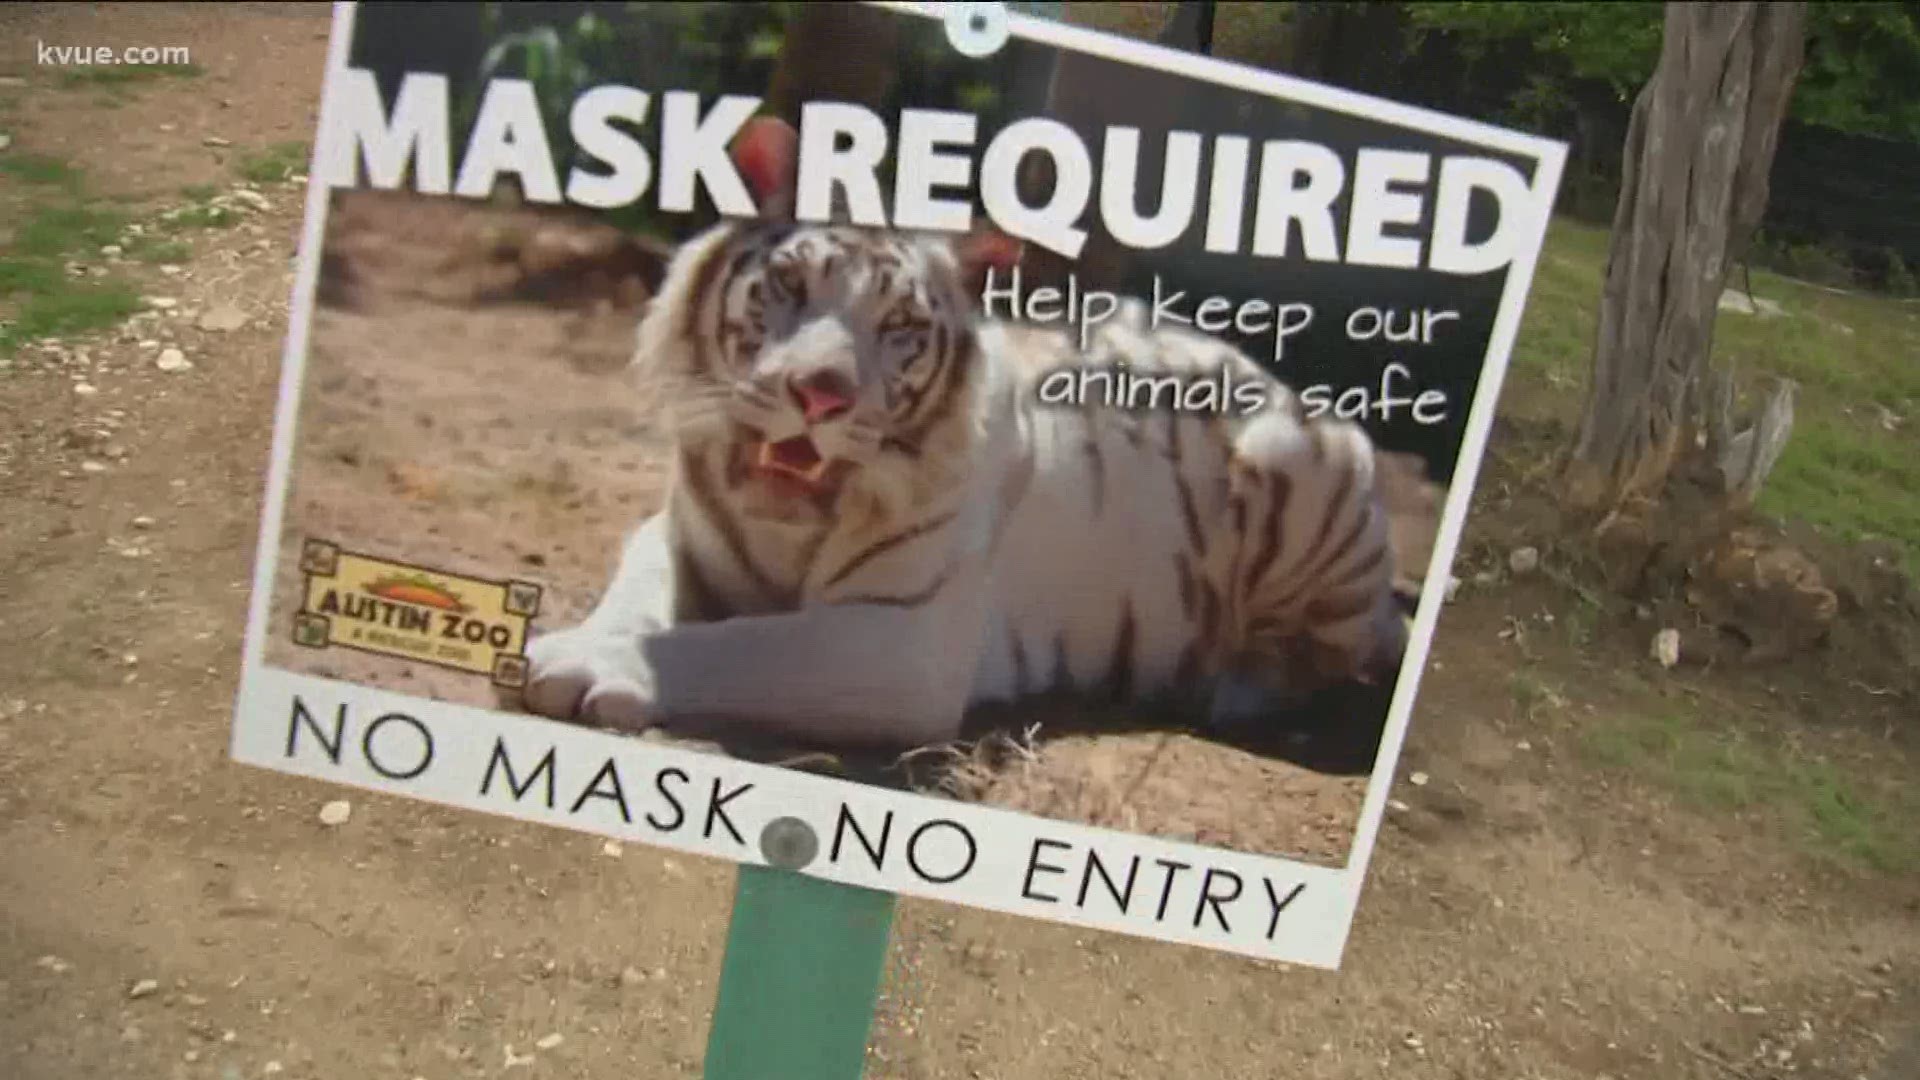 If you want to go to the zoo, you'll have to wear a mask for the protection of yourself and the animals.